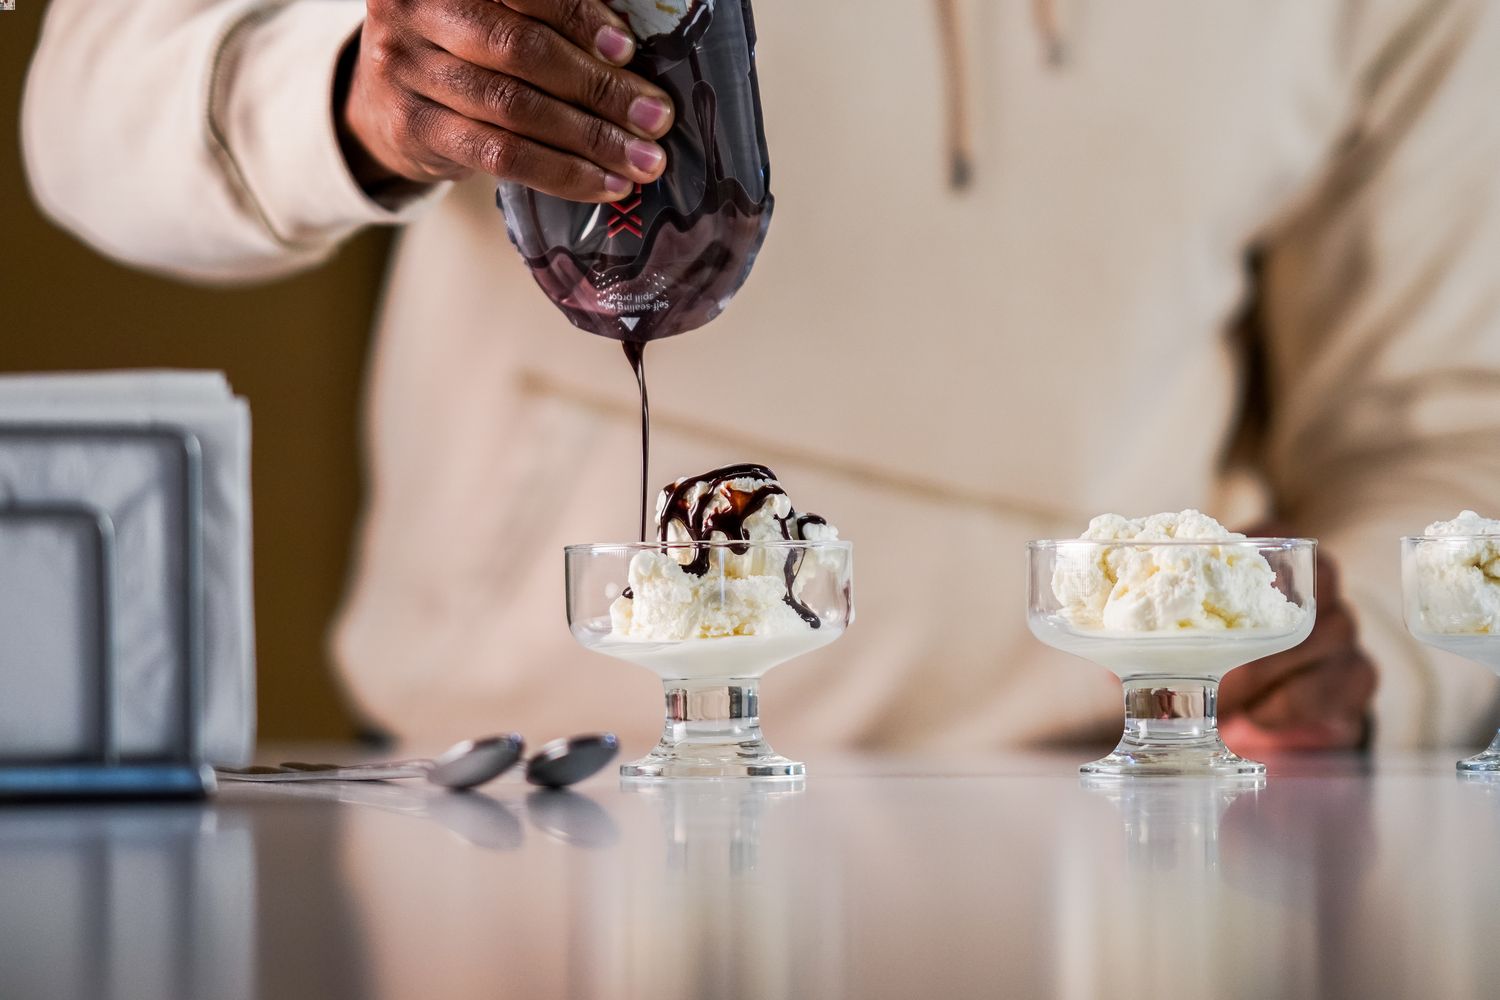 Person squeezing chocolate syrup out of an AeroFlexx Pak onto an ice cream sundae